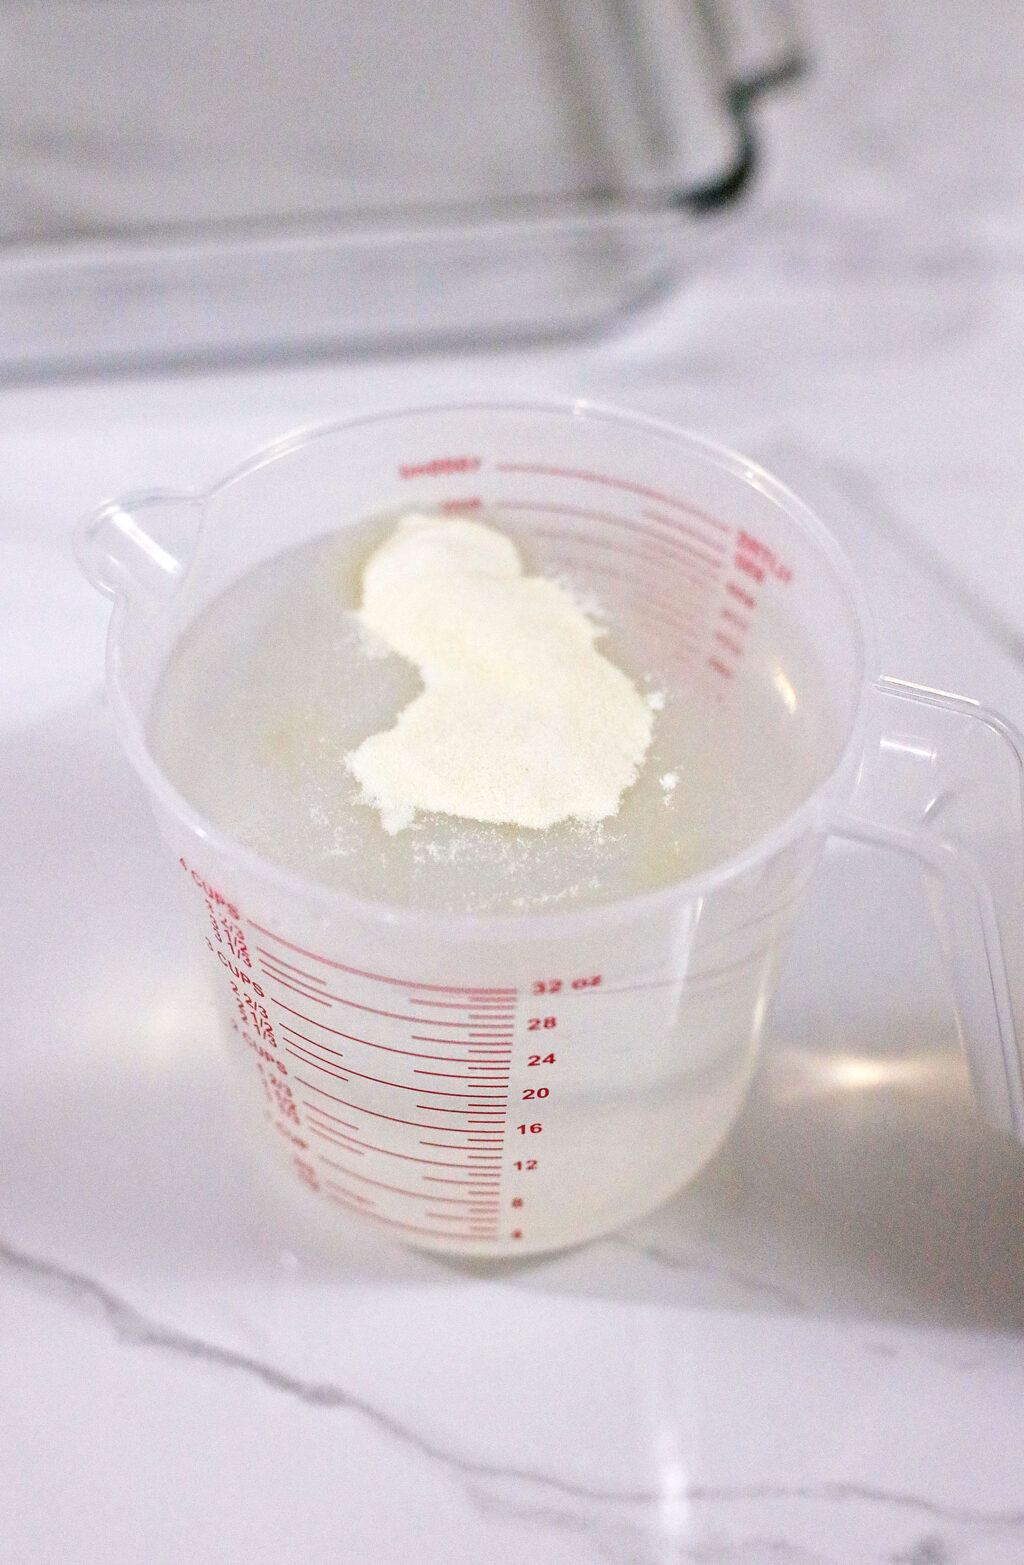 gelatin mix in a measuring cup